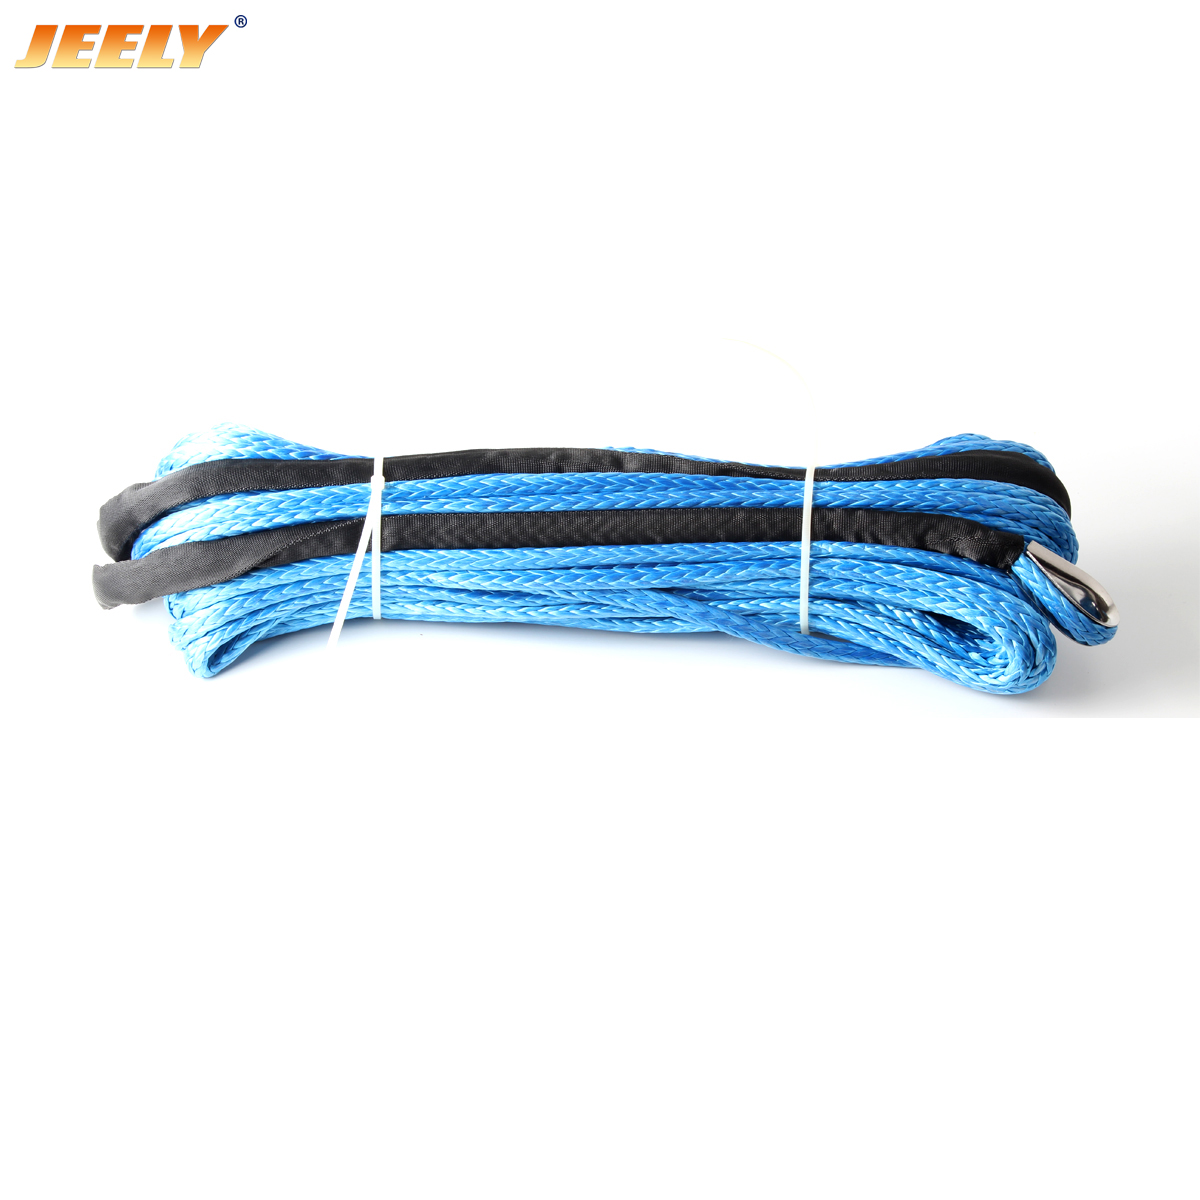 10mm*15m 12 strand 16534lbs uhmwpe synthetic car tow cable with tow eye Winch Rope